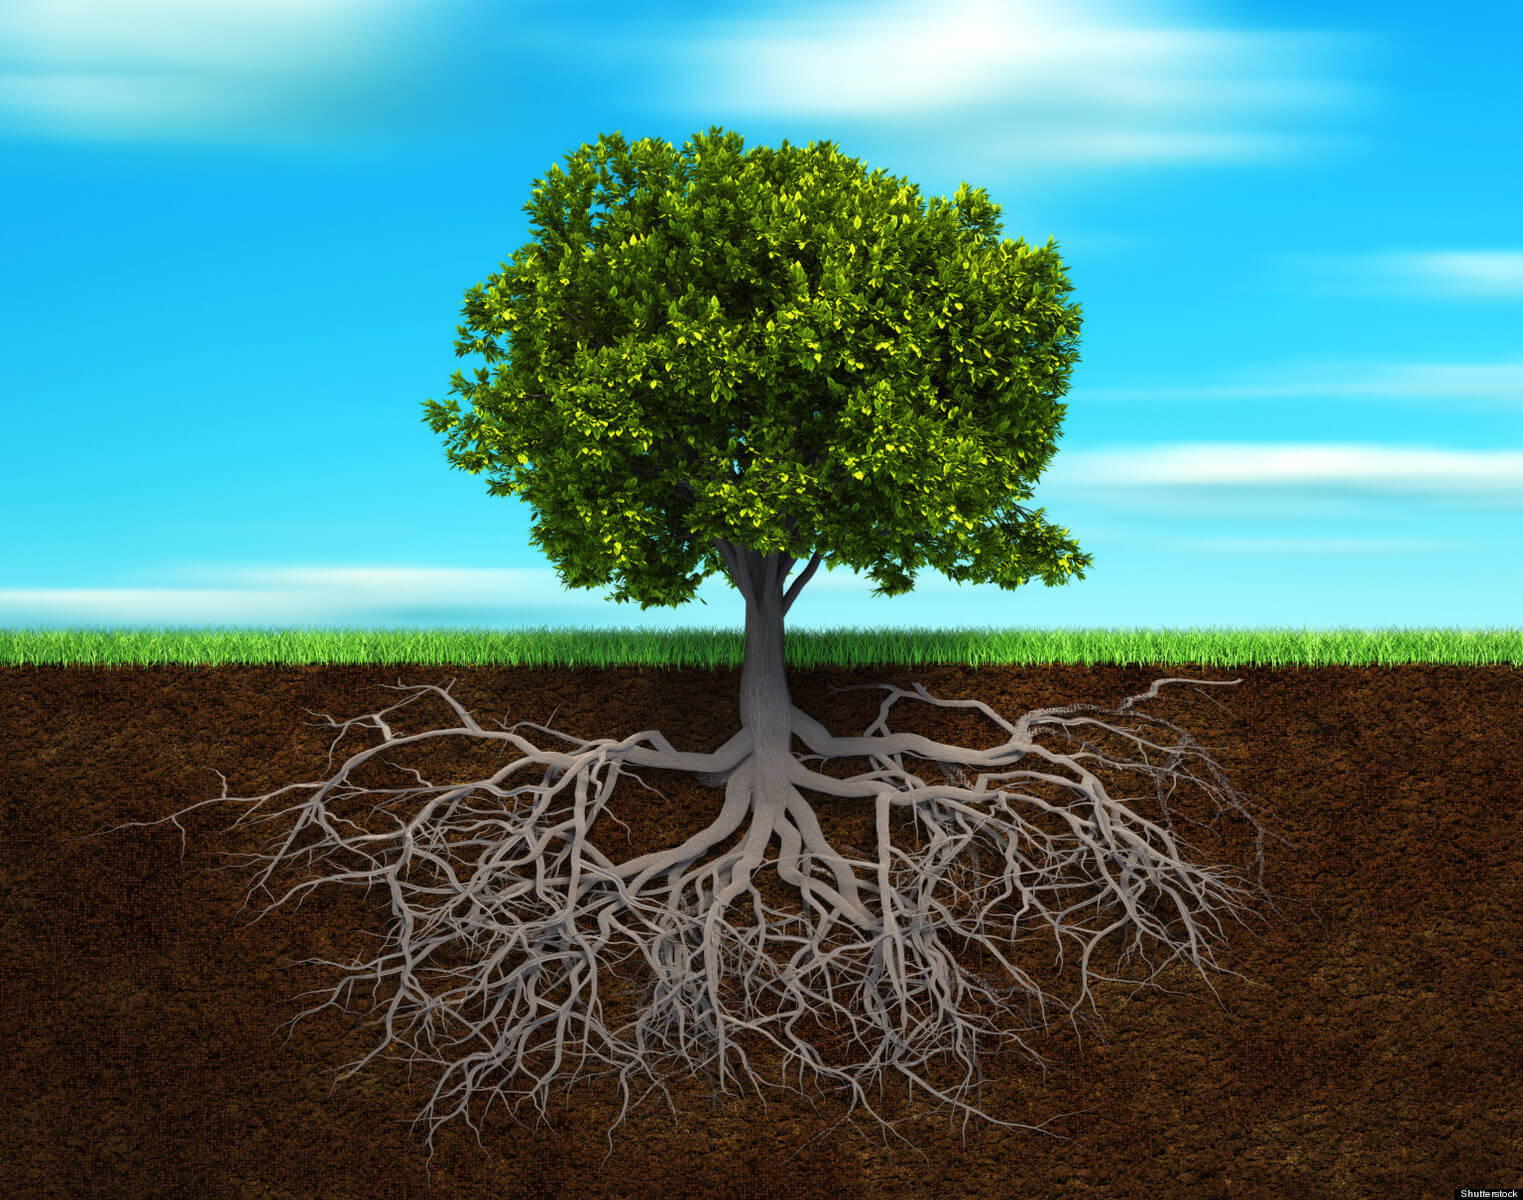 Your Root System - Connected to One Another